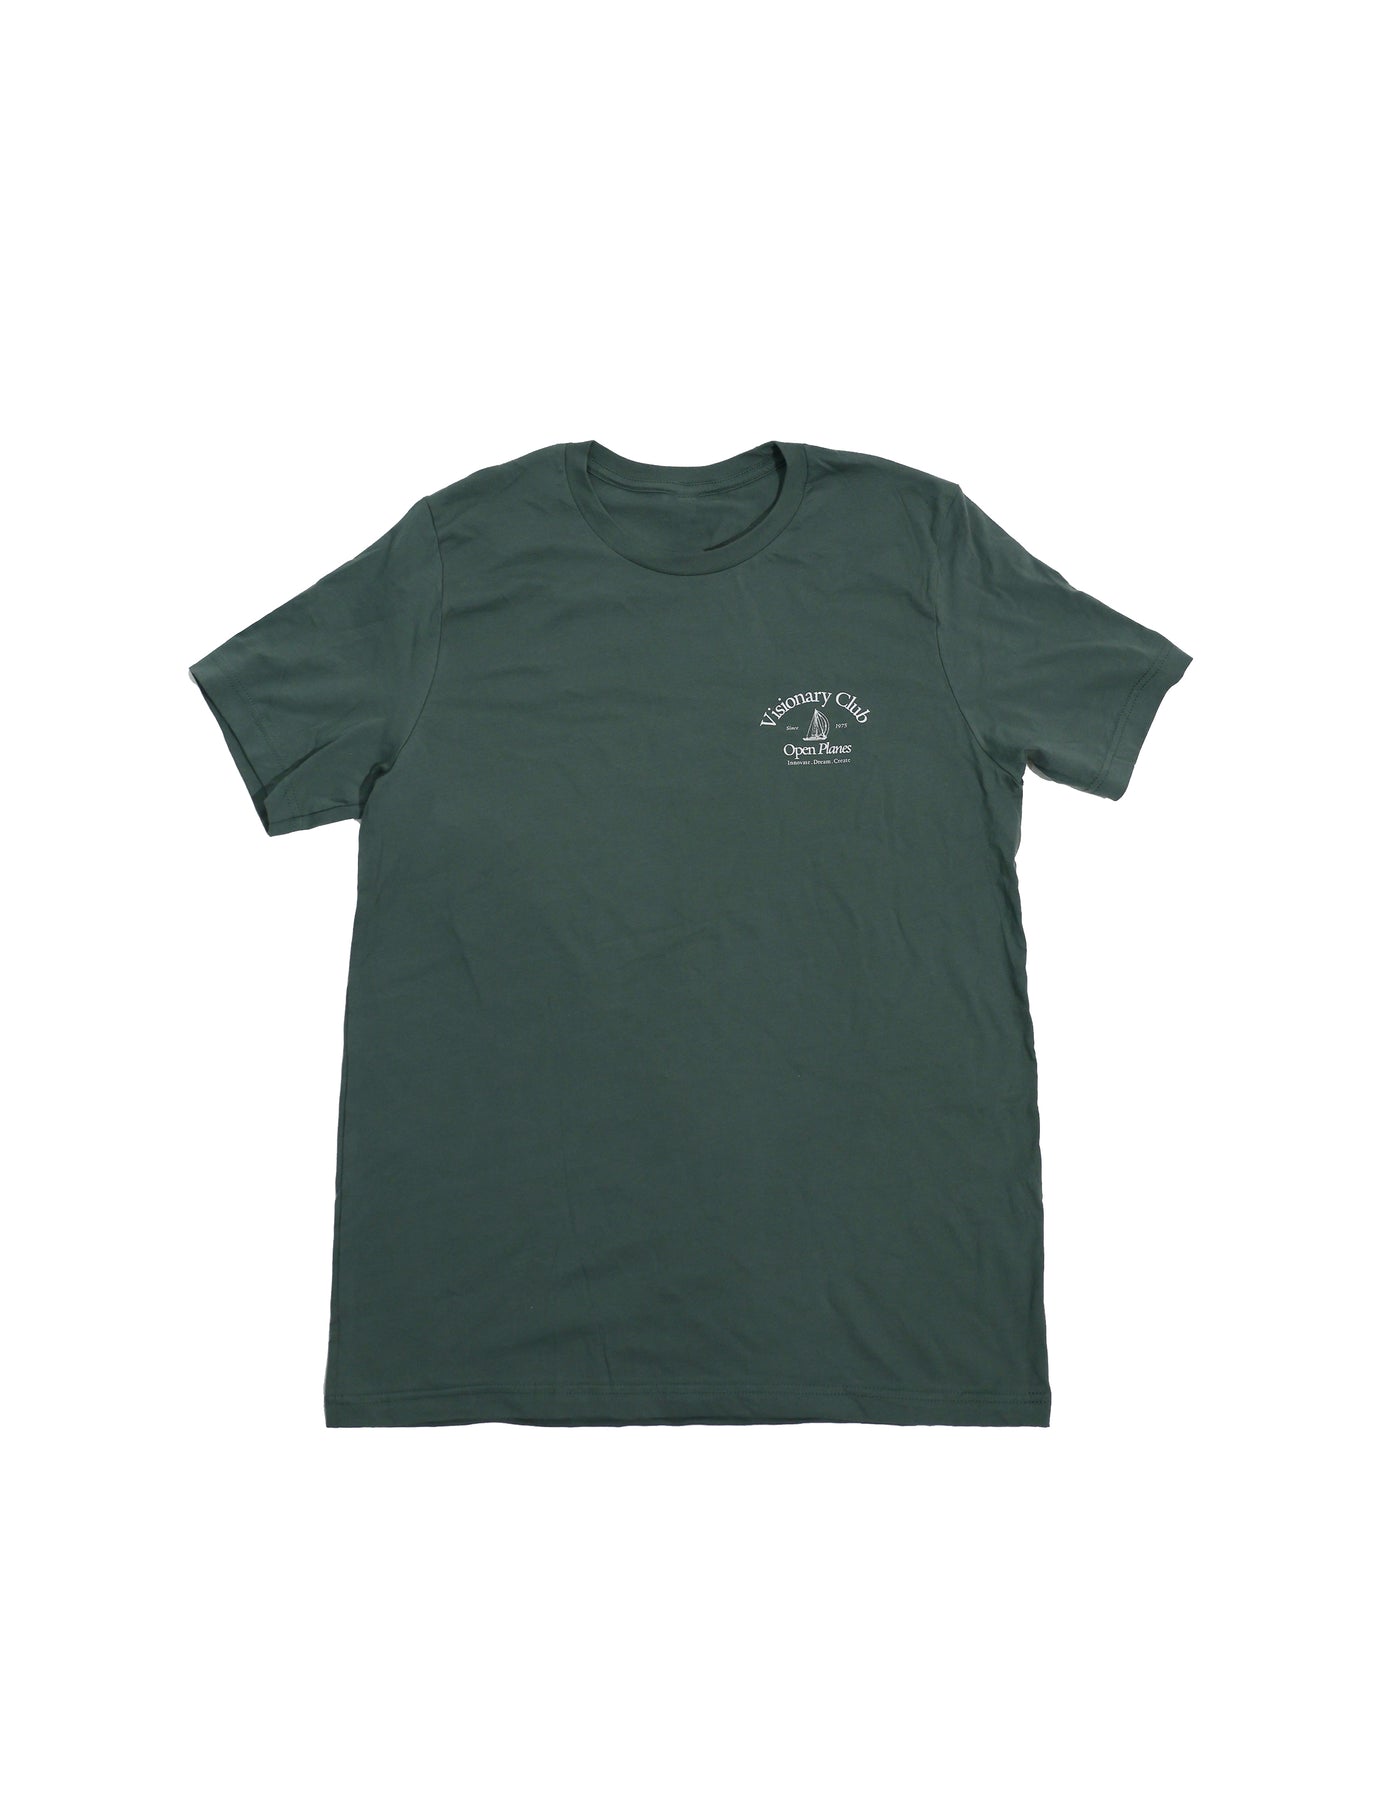 Visionary Club Tee - Forest